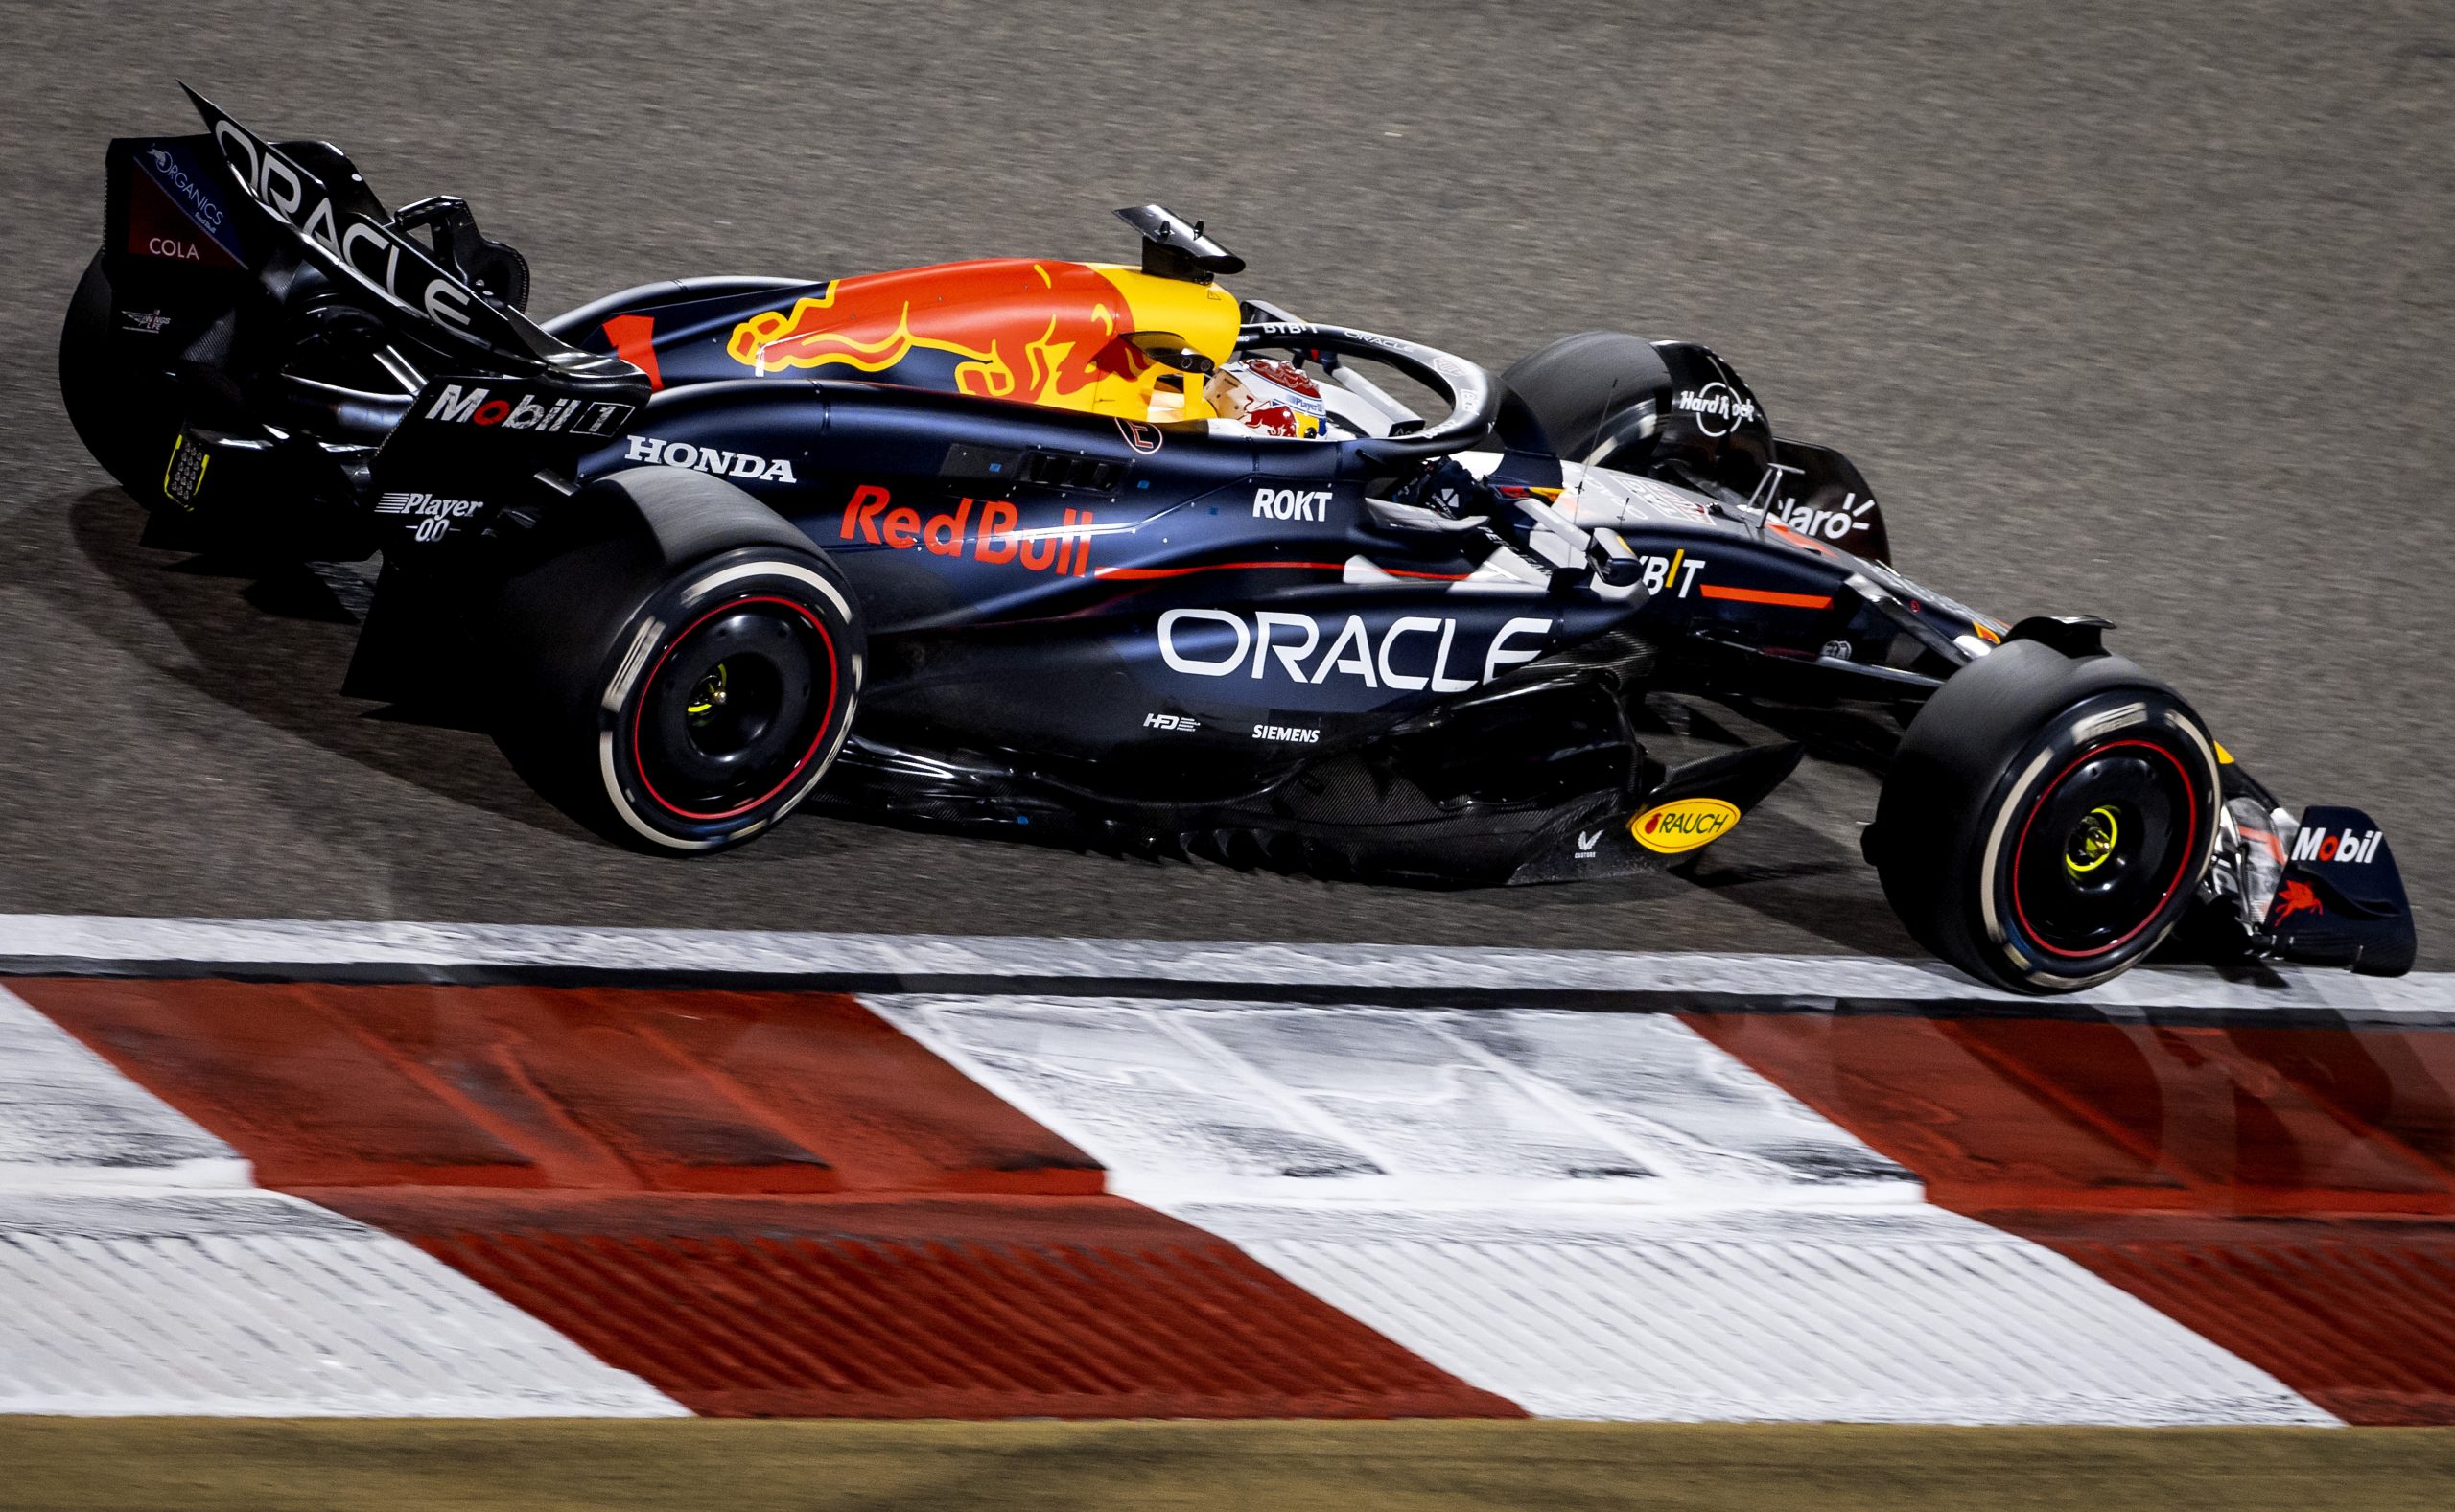 Max Verstappen (Red Bull Racing) during the Bahrain Grand Prix. ANP REMKO DE WAAL (Photo by ANP via Getty Images)